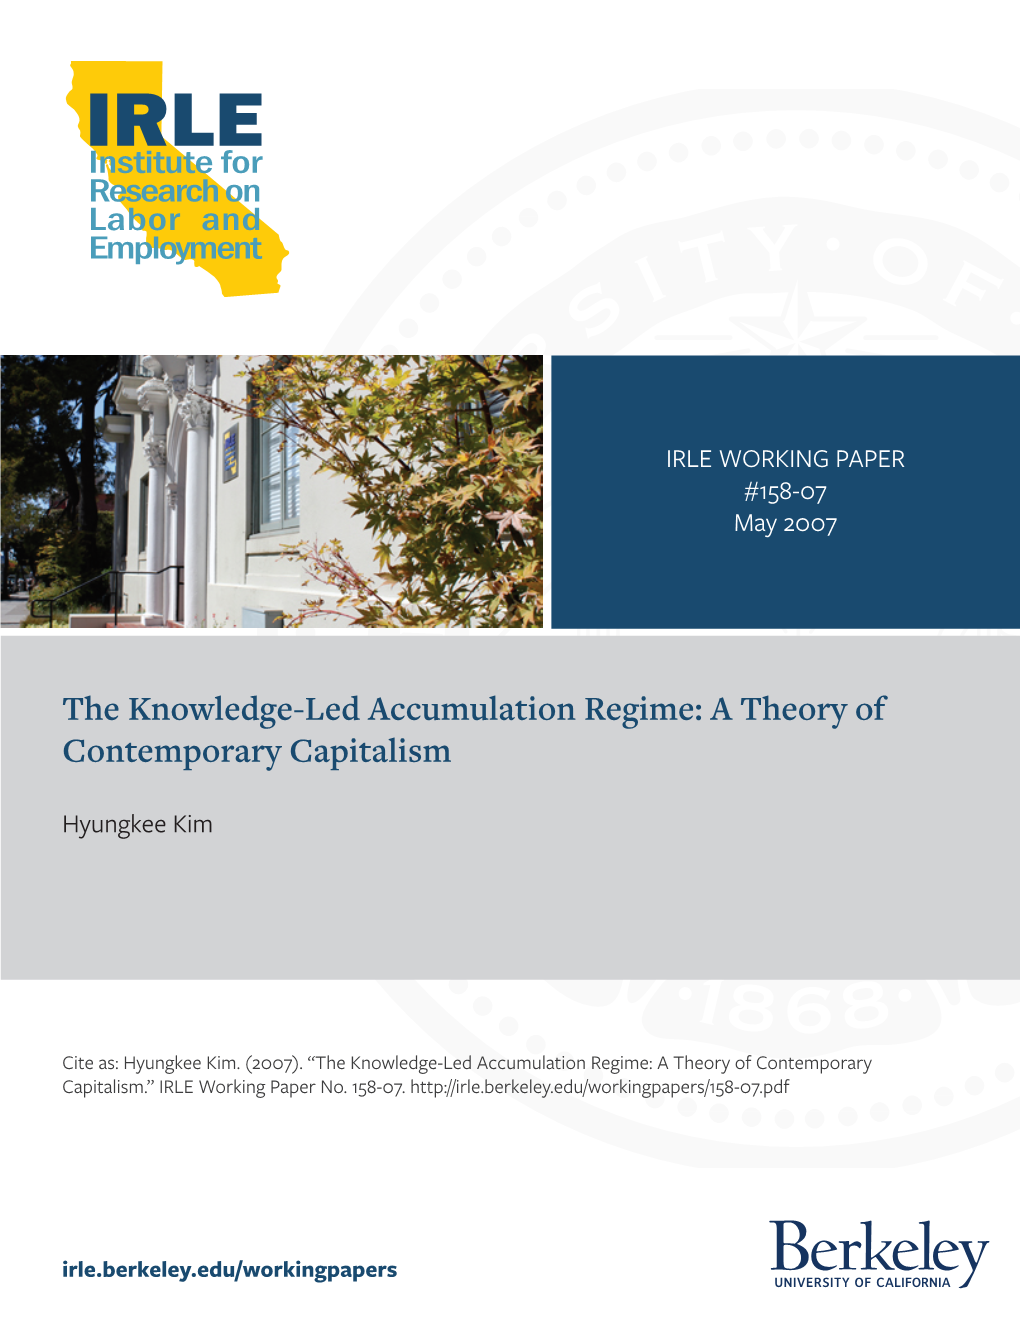 The Knowledge-Led Accumulation Regime: a Theory of Contemporary Capitalism